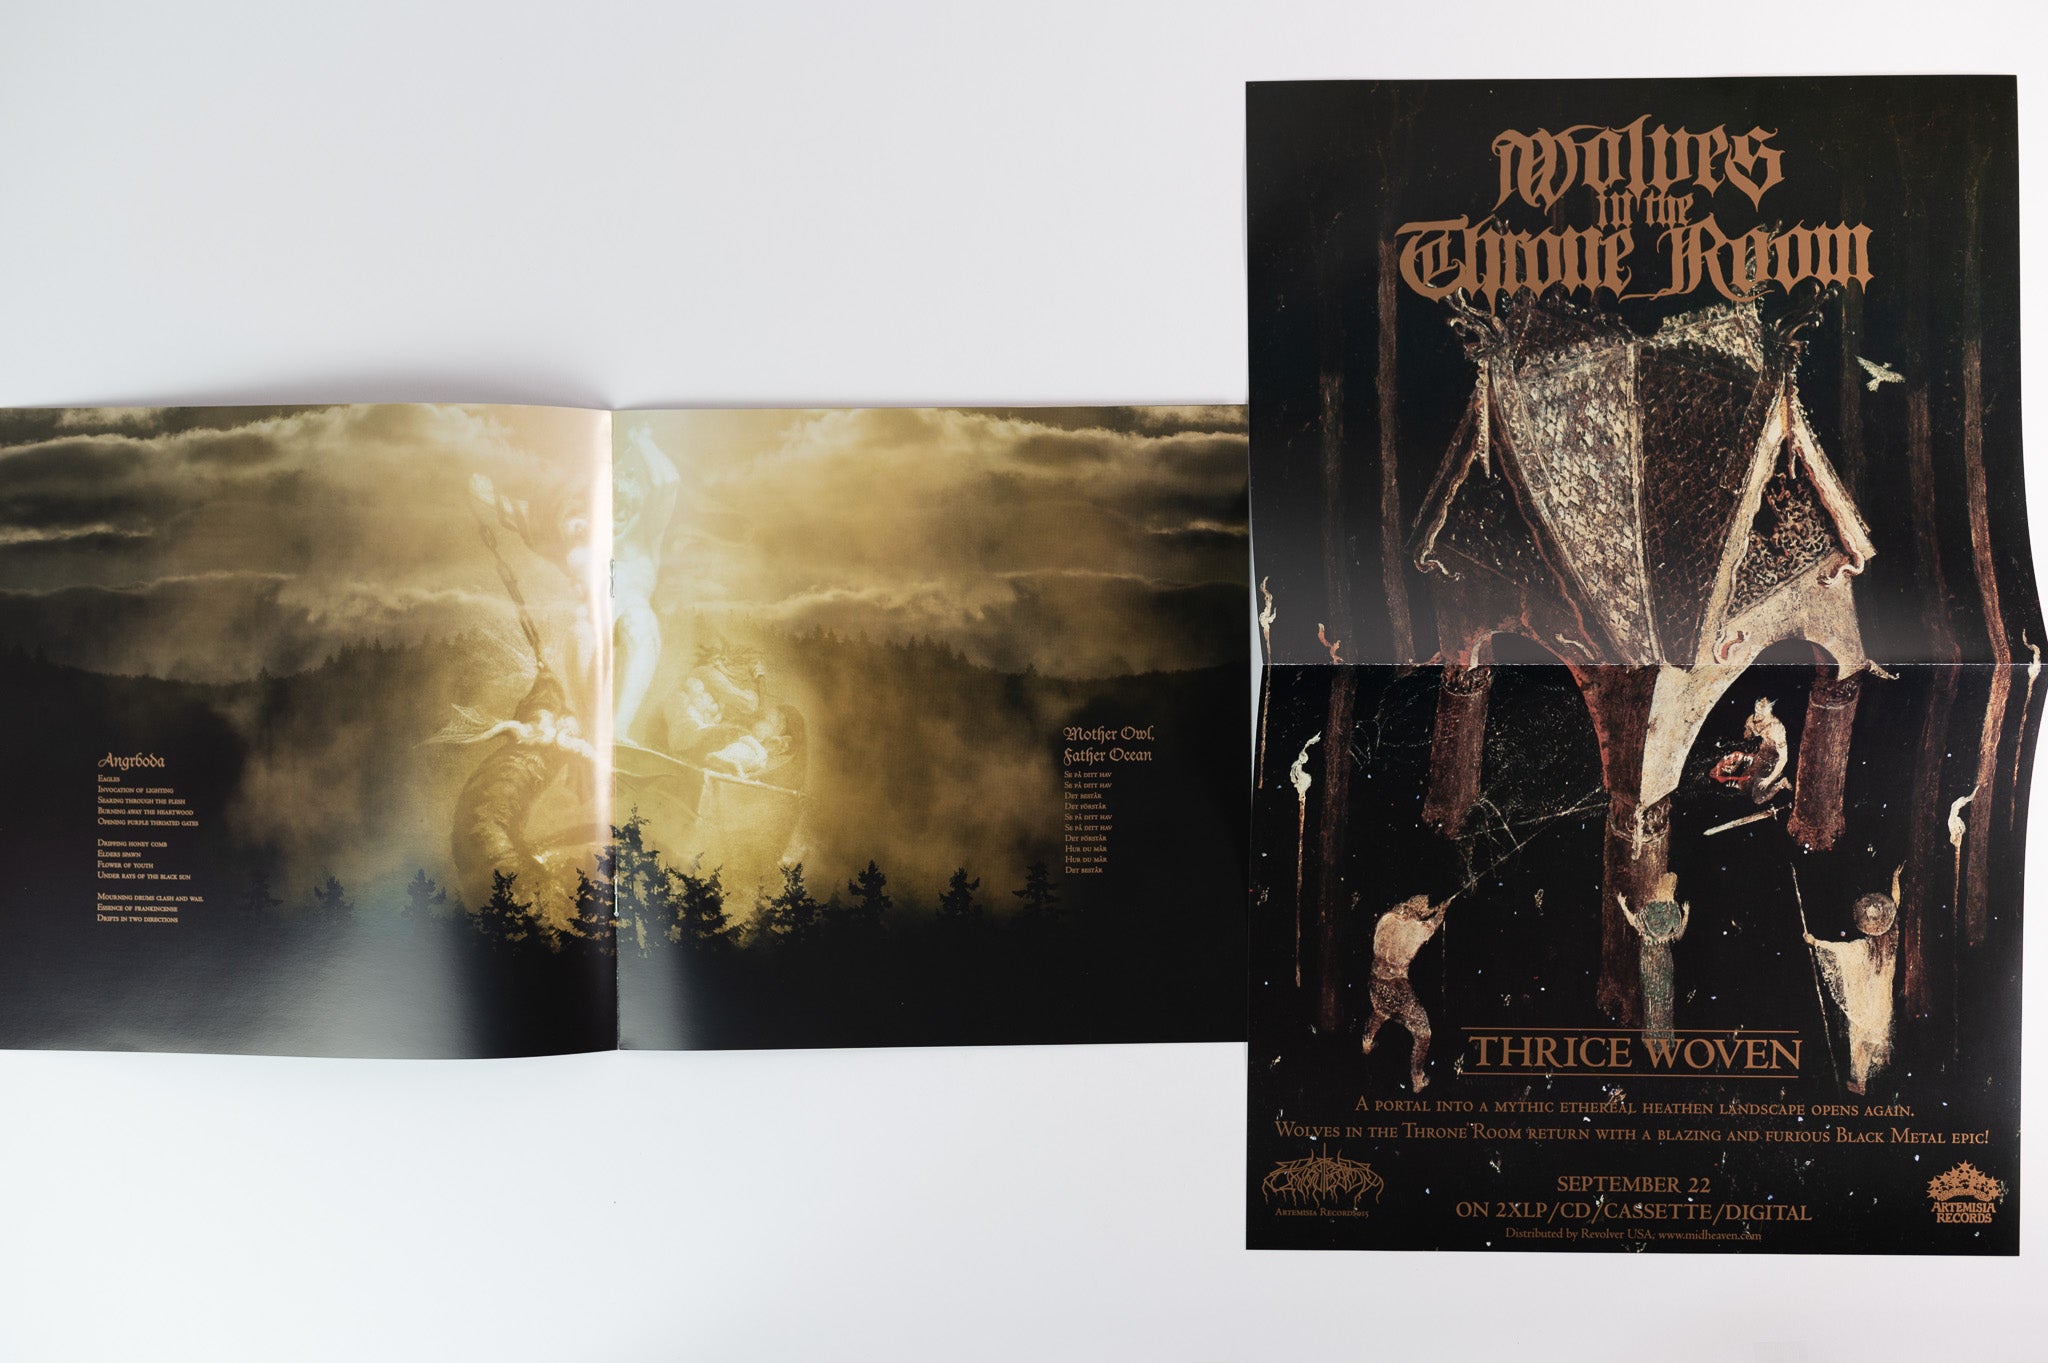 Wolves In The Throne Room - Thrice Woven on Artemisia Records - Colored Vinyl